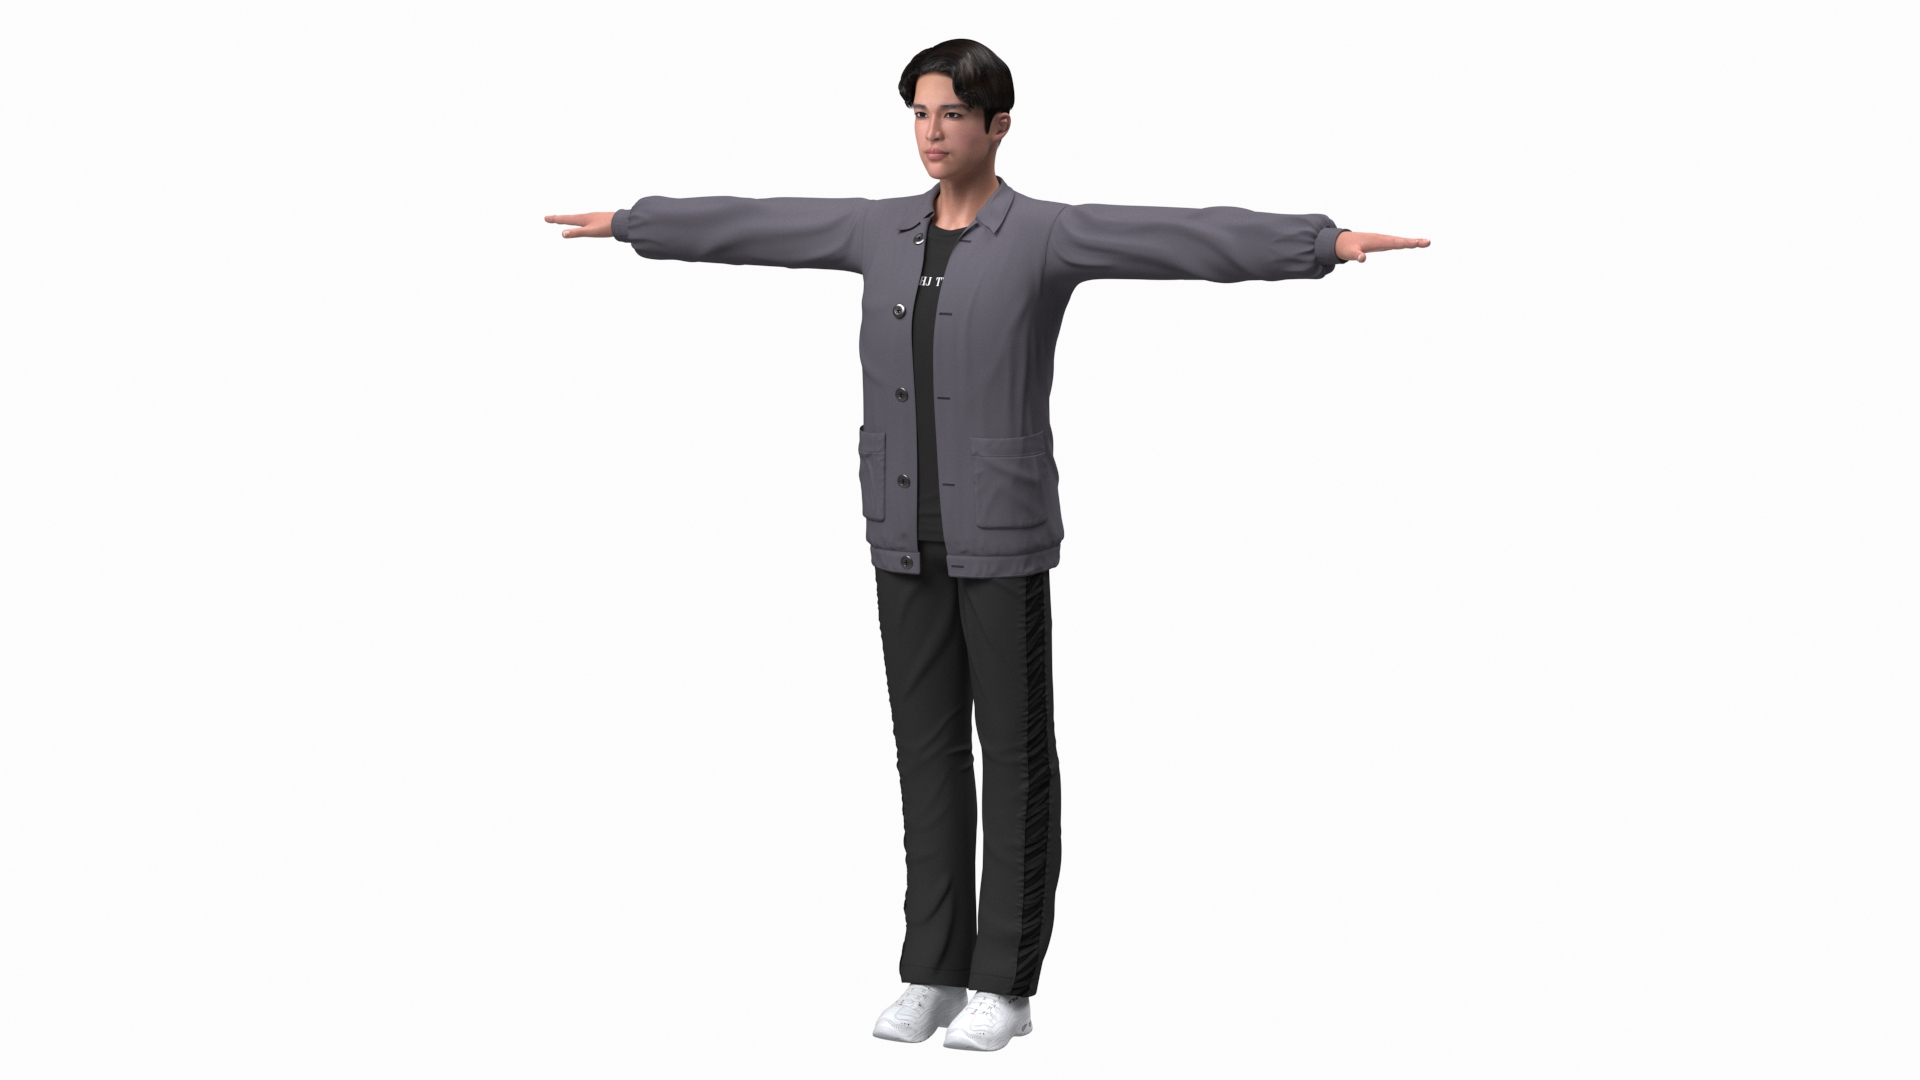 3 d character design sheet, clean t - pose of a